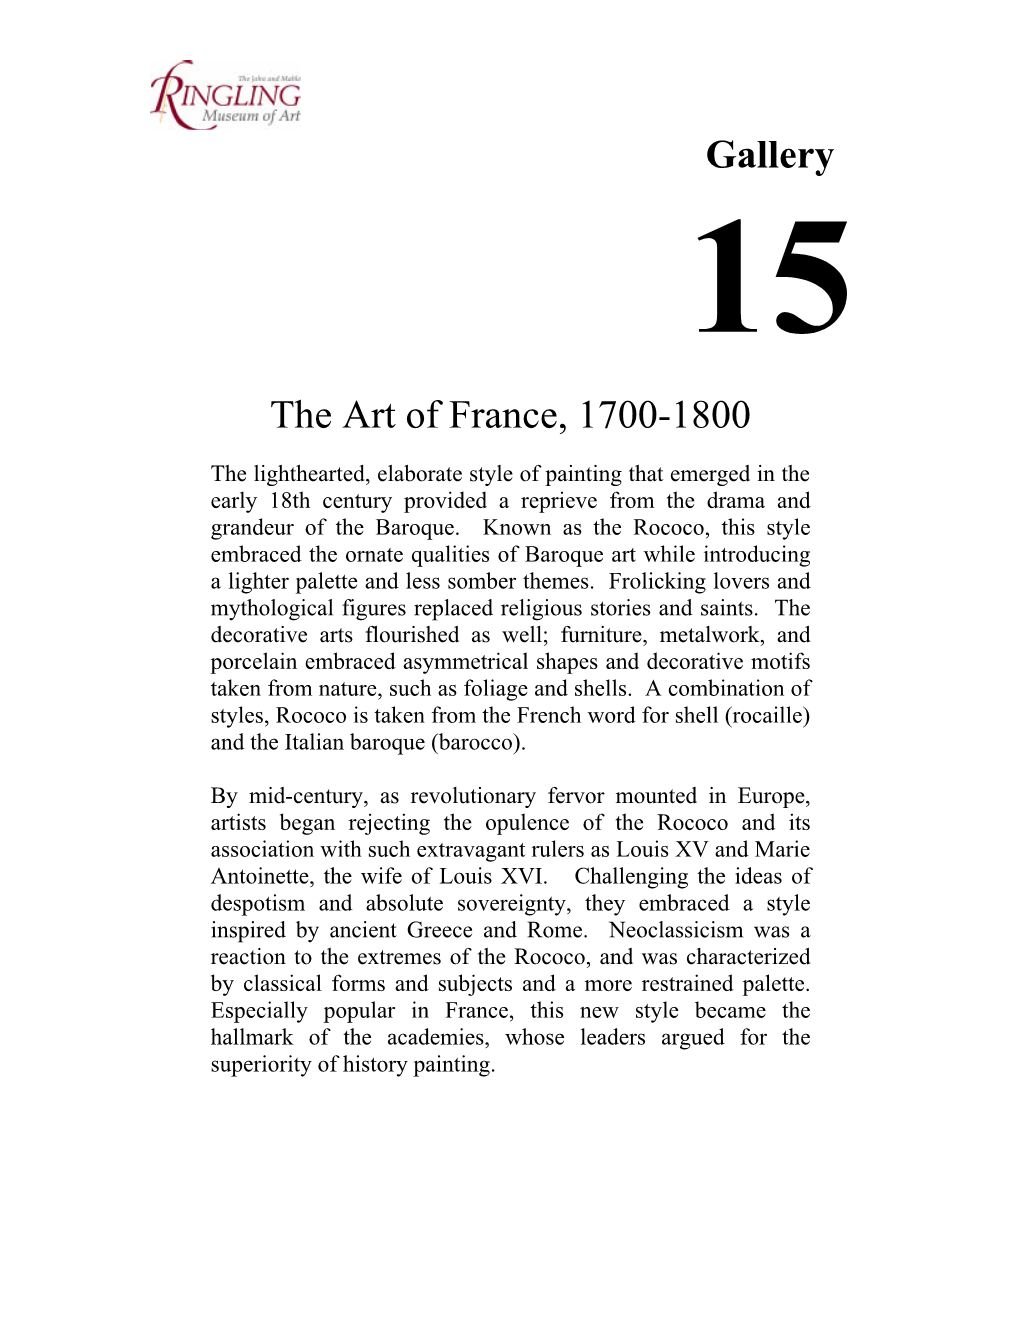 Gallery the Art of France, 1700-1800